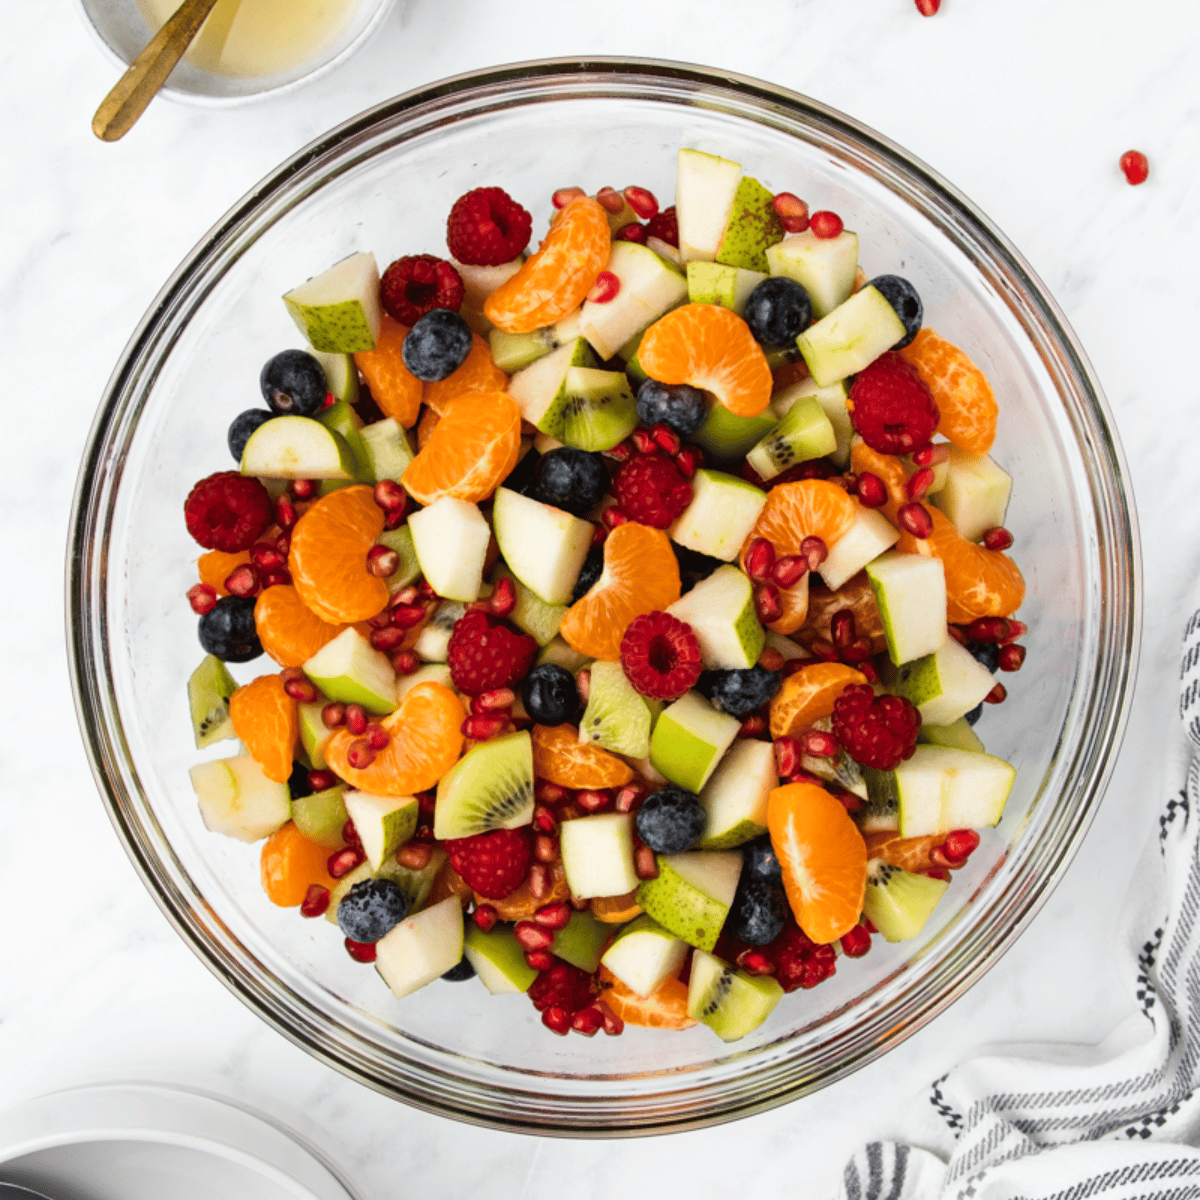 a clear glass bowl filled with fruit salad featuring clementines, green apples, and pomegranate seeds